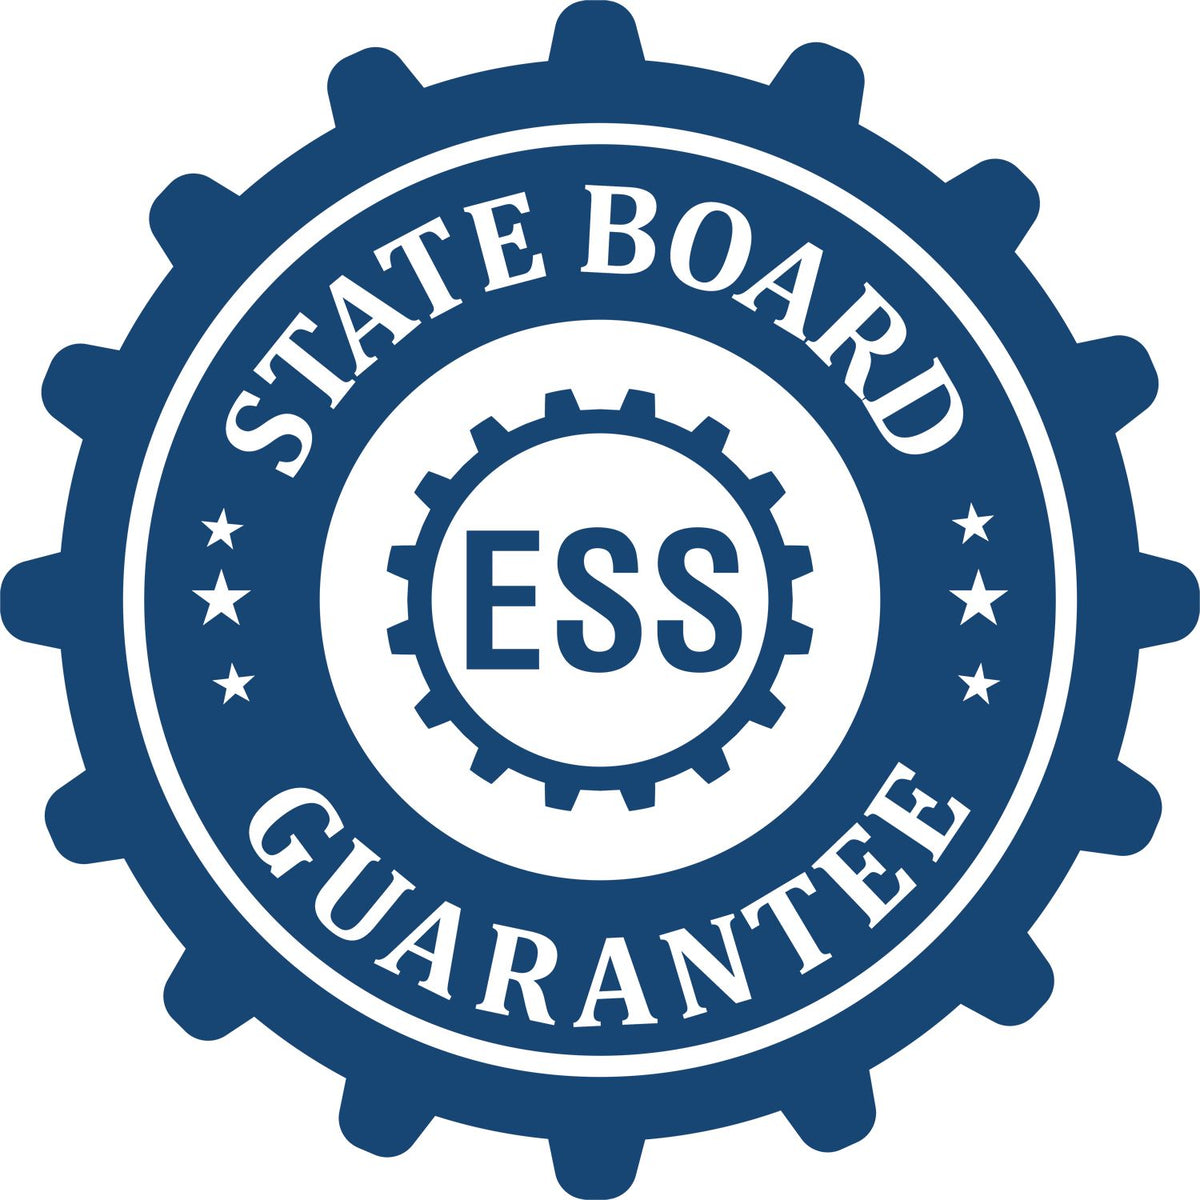 An emblem in a gear shape illustrating a state board guarantee for the State of New Mexico Extended Long Reach Geologist Seal